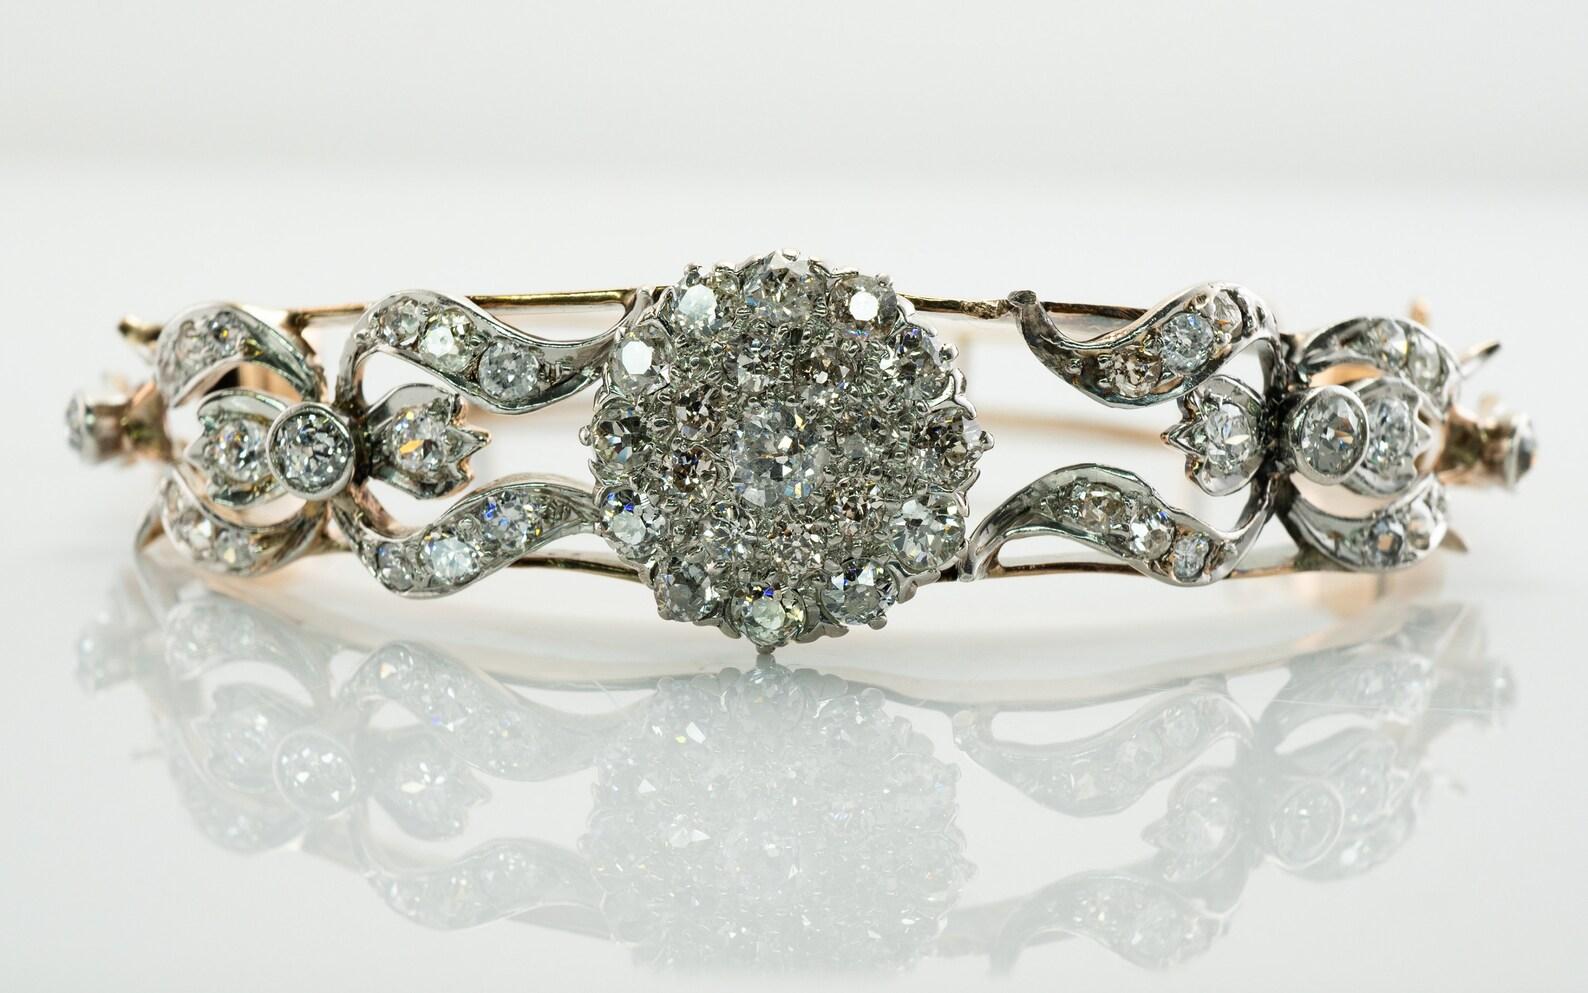 This antique bracelet circa the 1890s is finely crafted in 14K Yellow and White gold. This piece is studded with genuine Old mine cut diamonds. The diamonds vary in size and color/clarity. There are 55 diamonds ranging from SI1 to I2 clarity and H-I